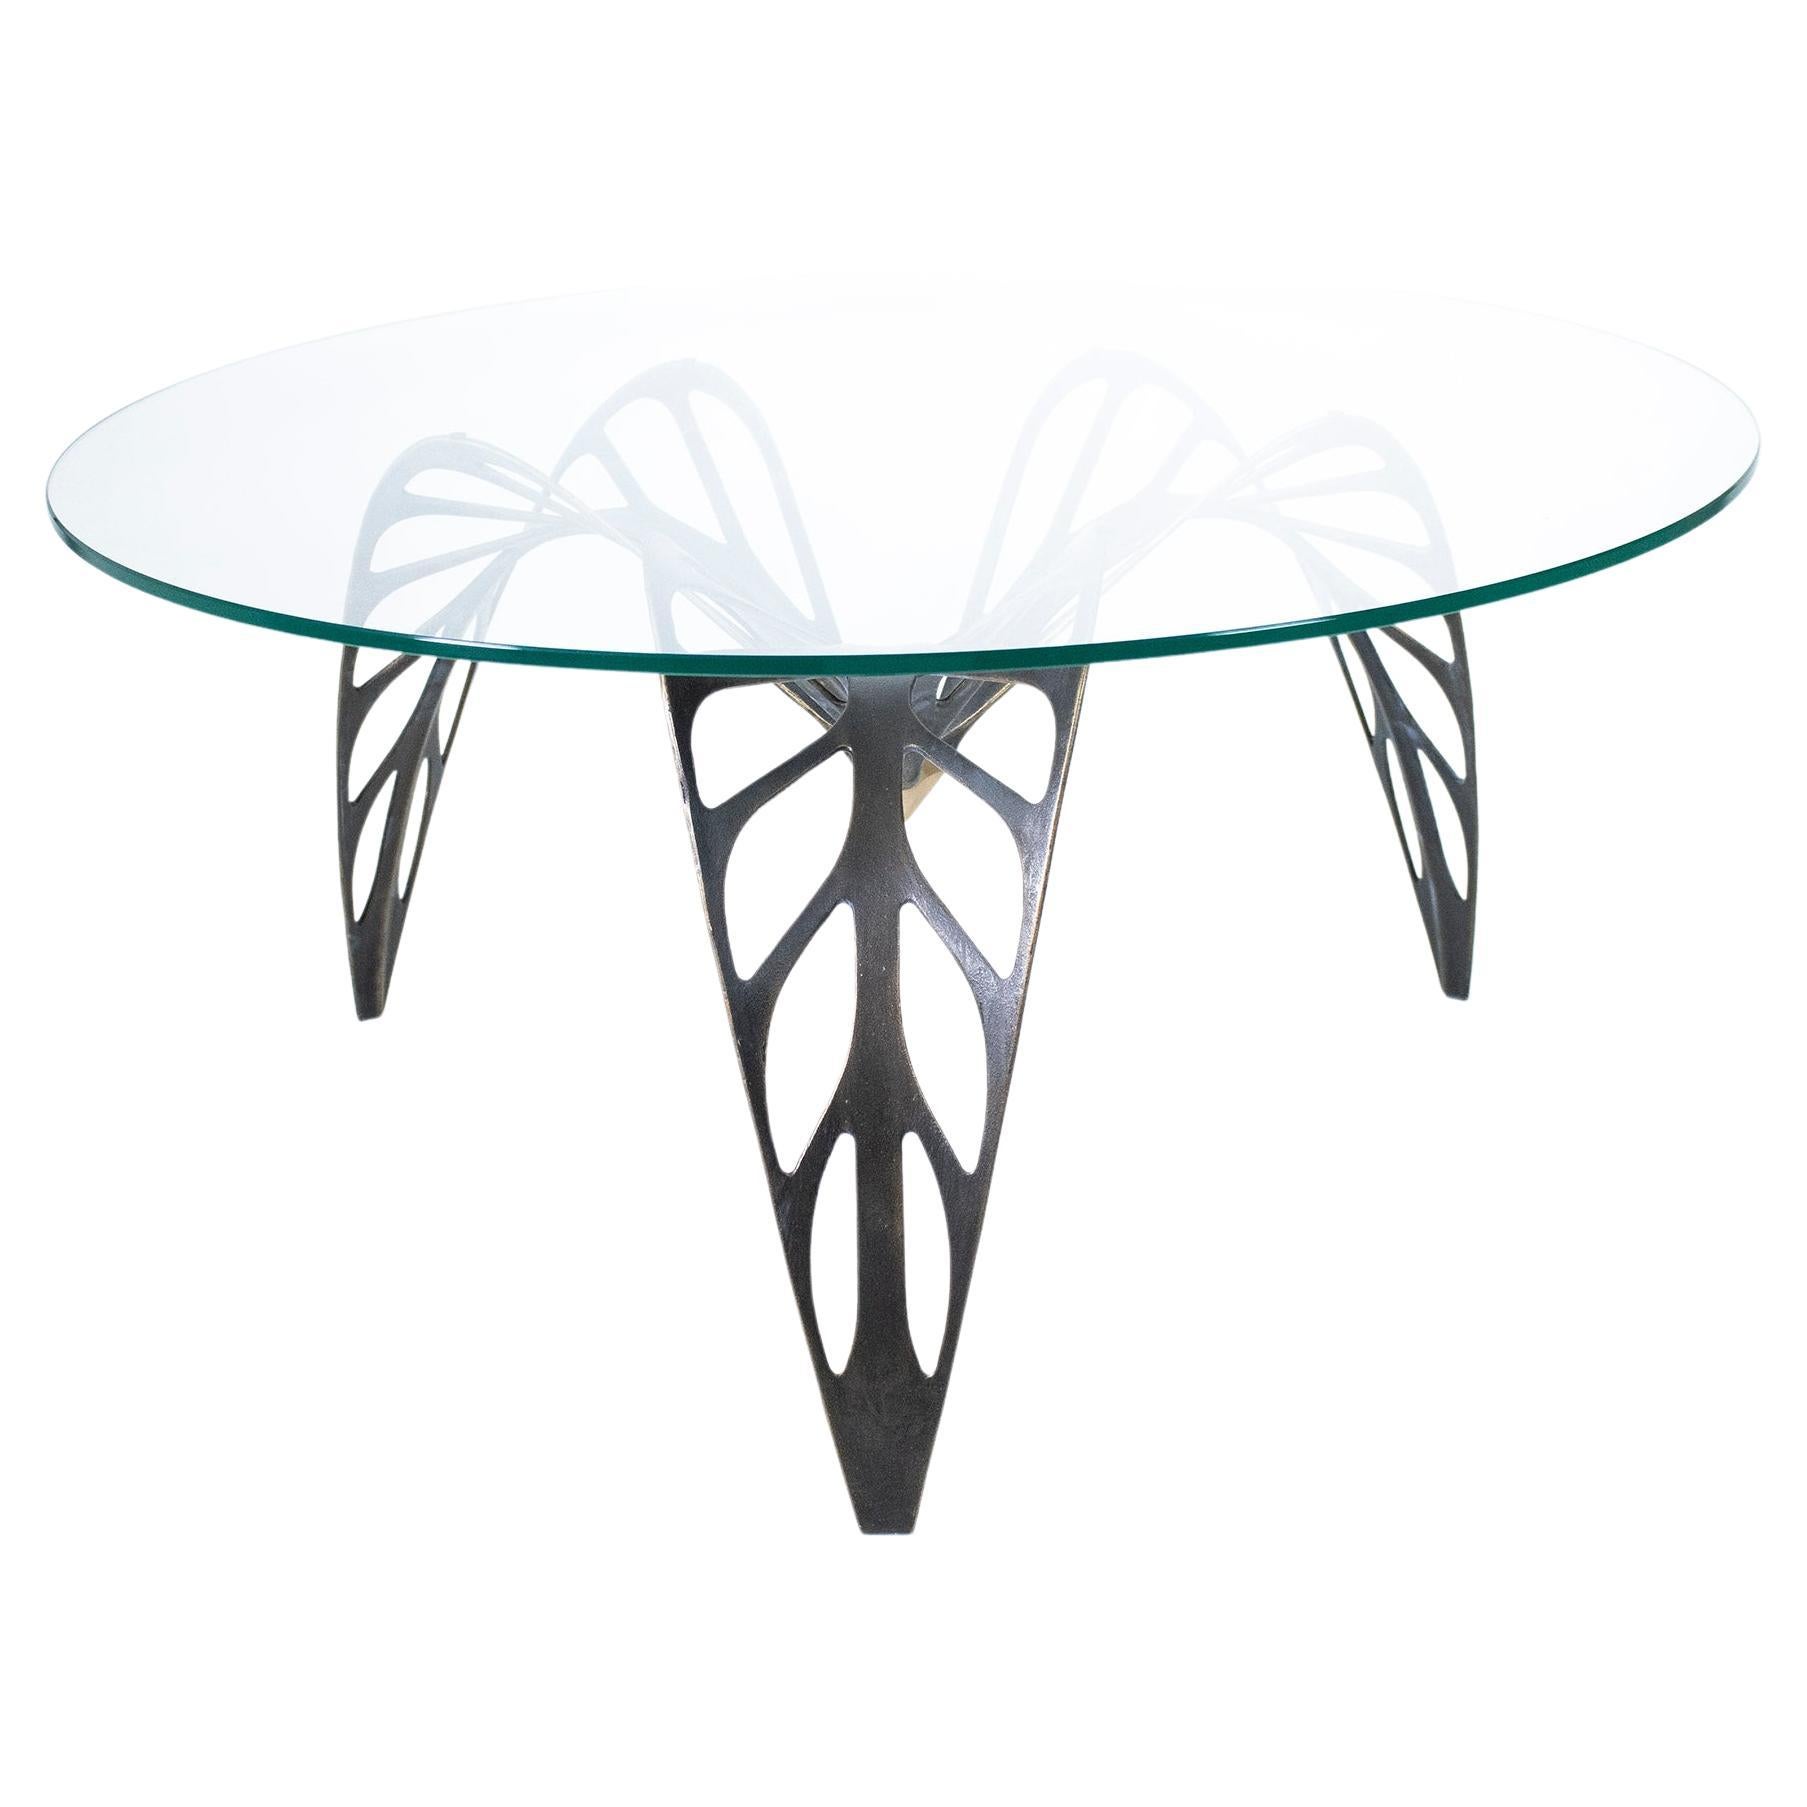 Del Table, Coffee Table For Sale